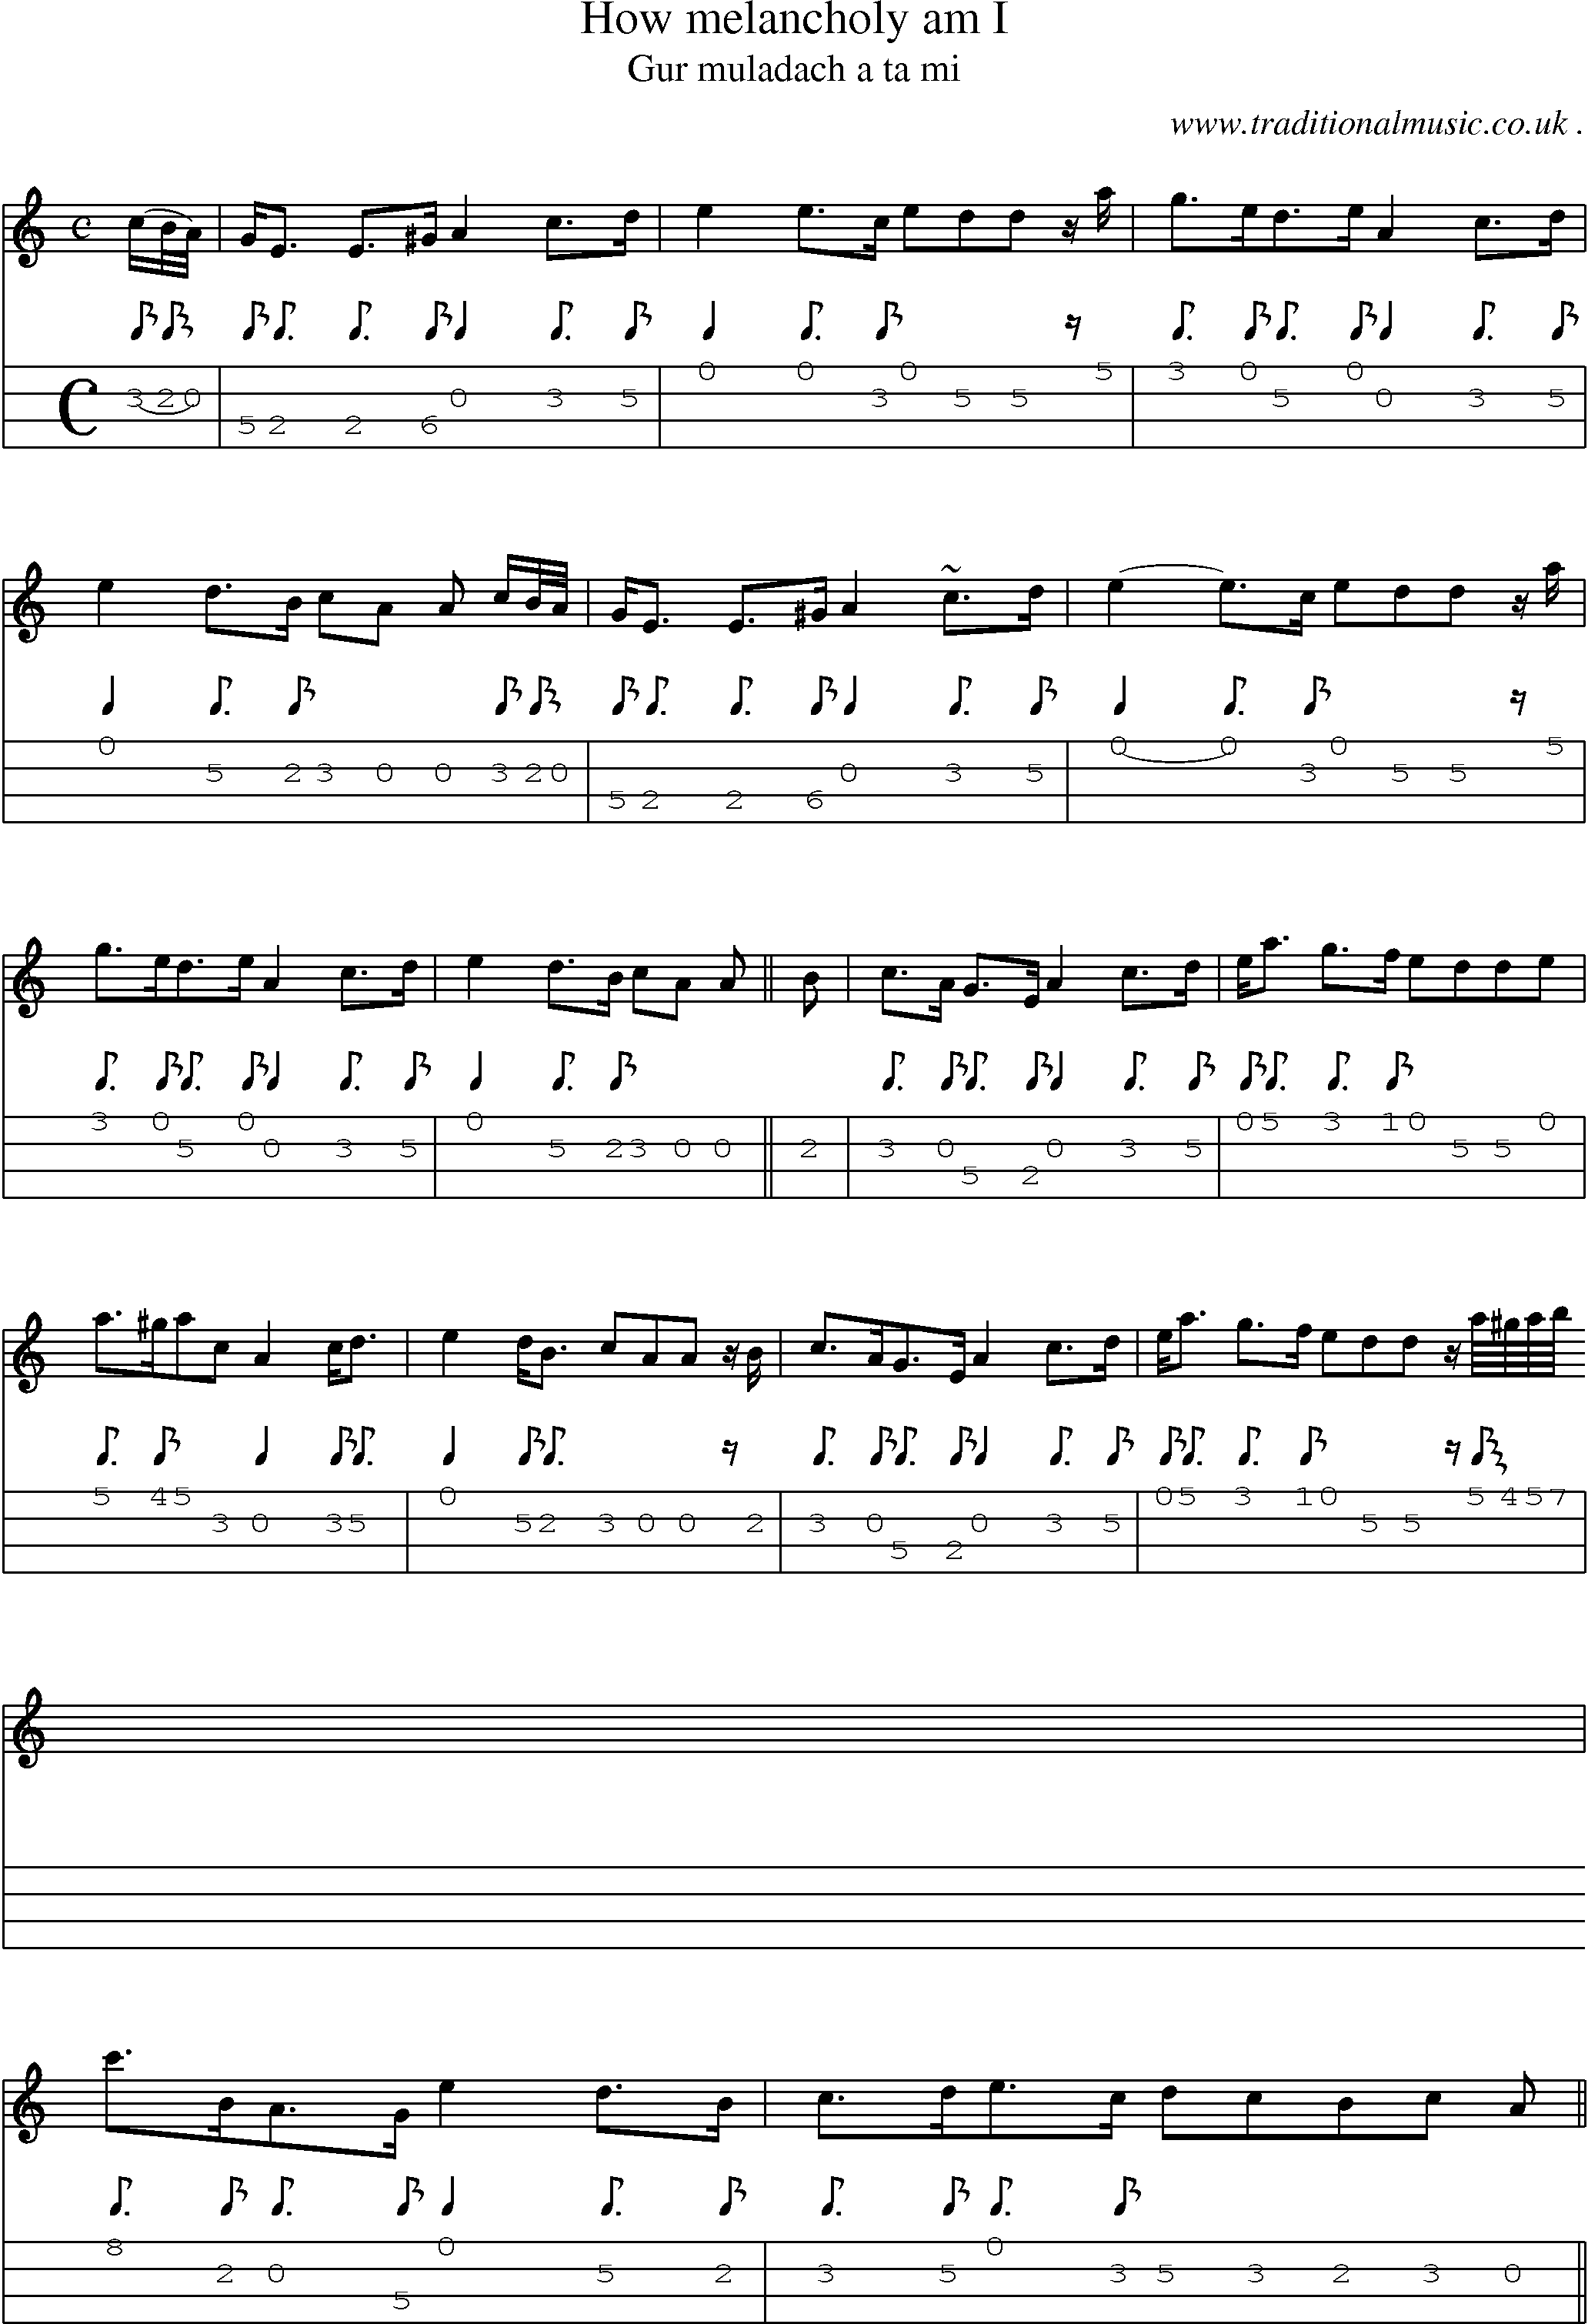 Sheet-music  score, Chords and Mandolin Tabs for How Melancholy Am I